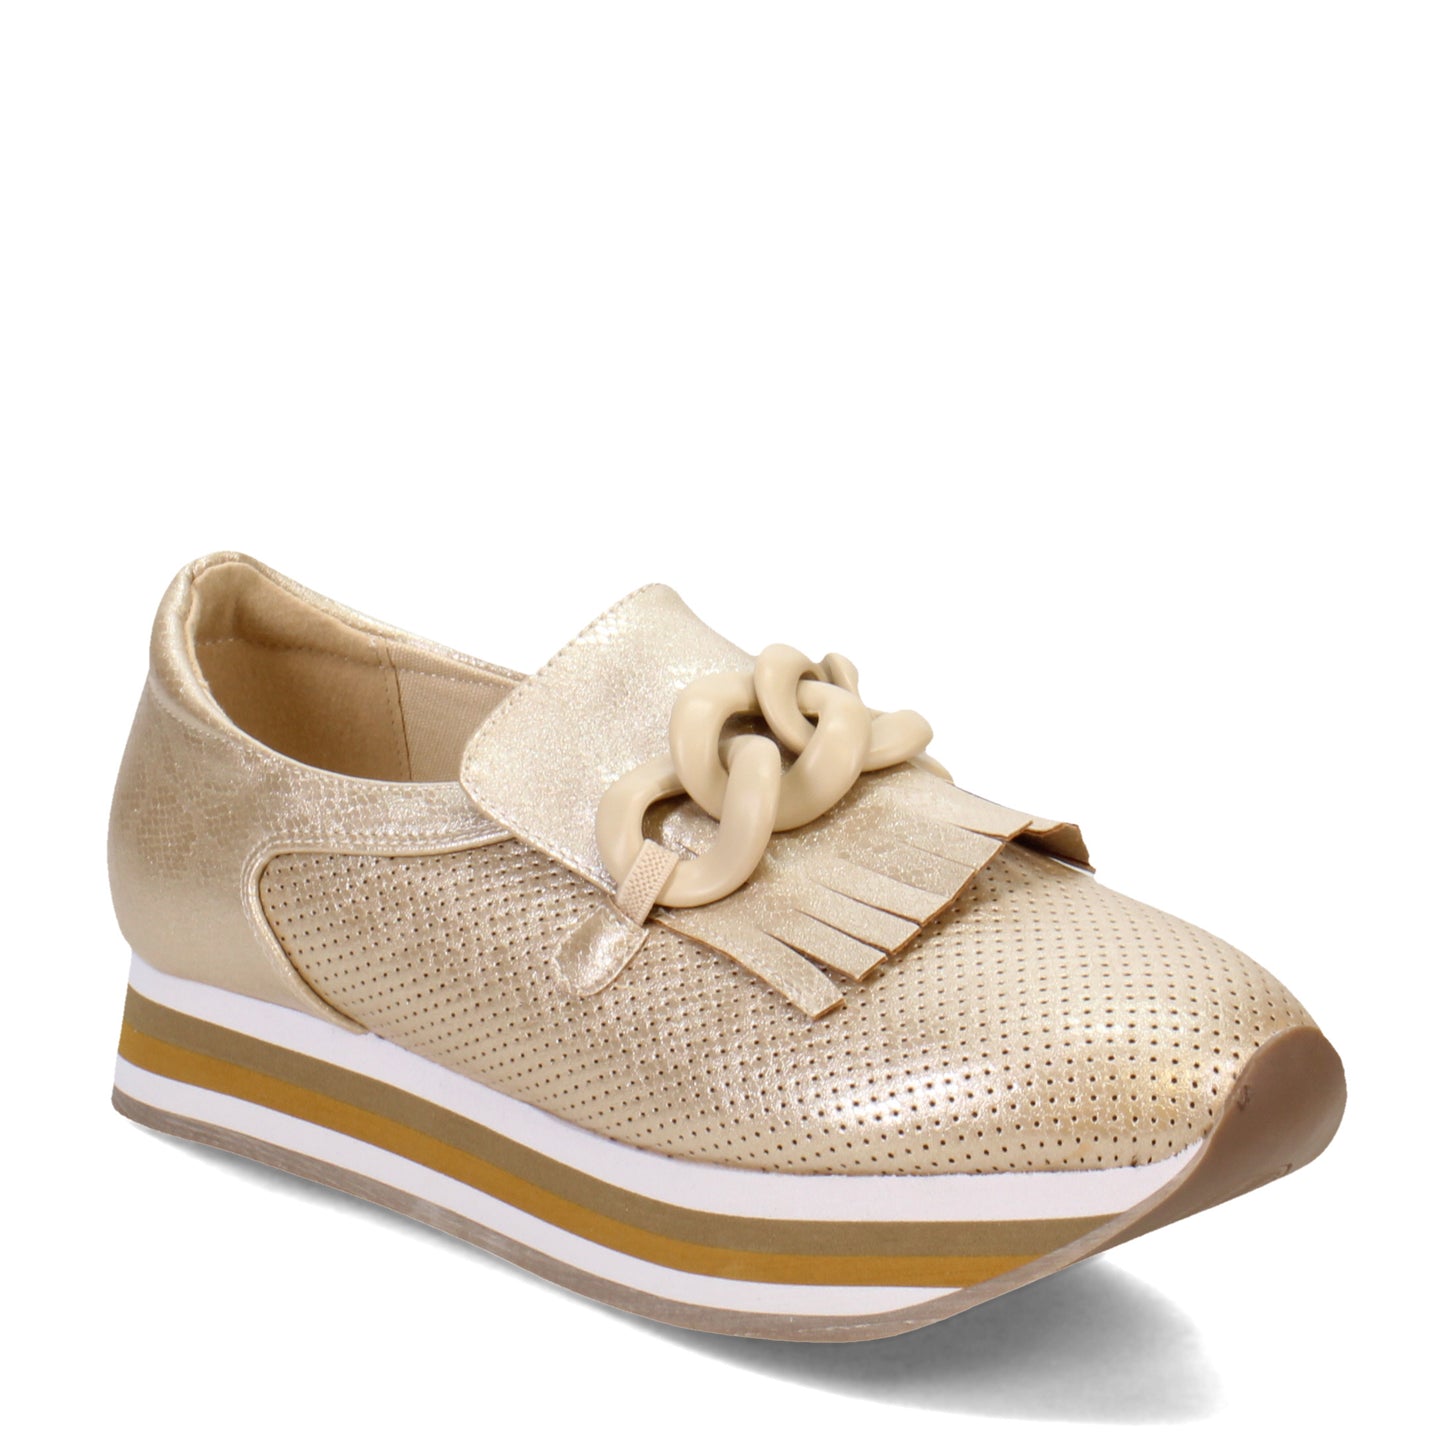 Peltz Shoes  Women's Coconuts by Matisse Bess Loafer Gold BESS-GOLD